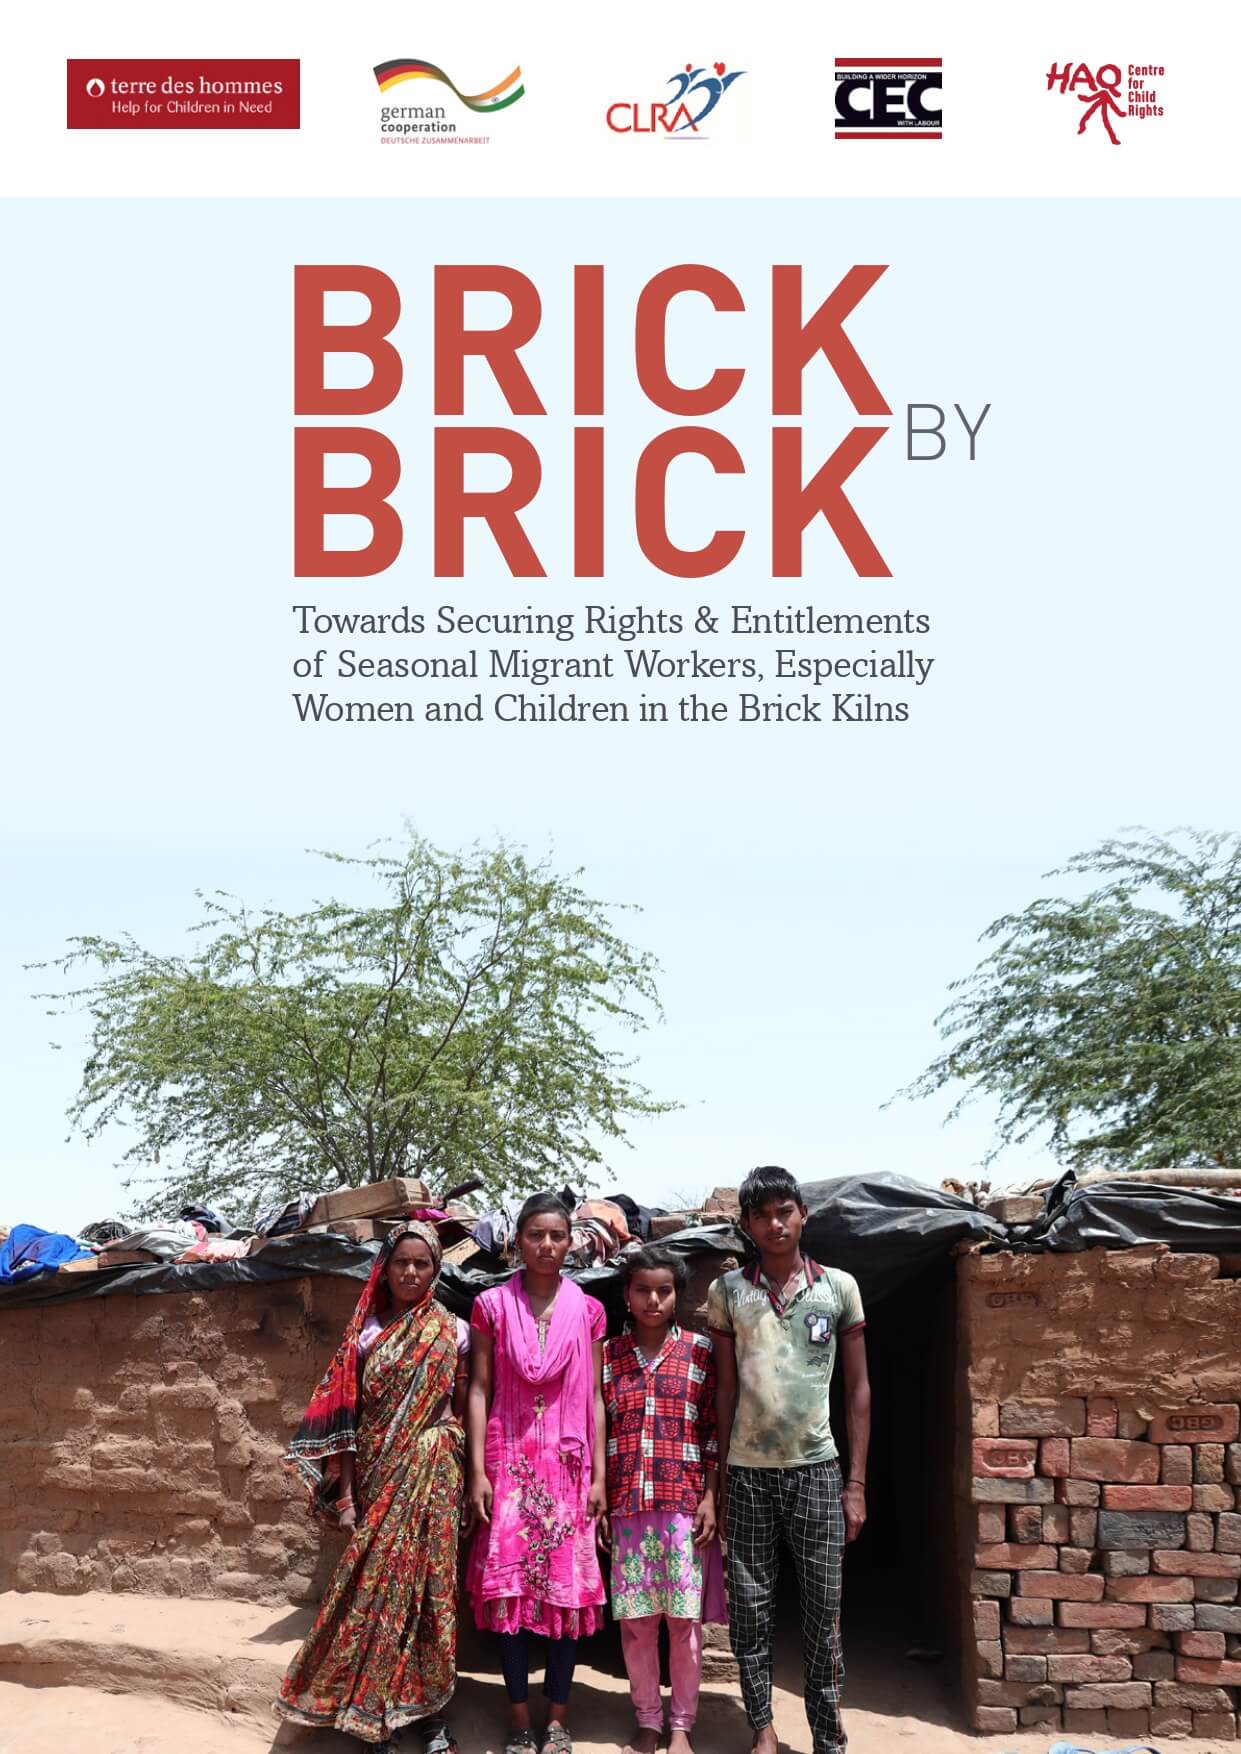 Brick by Brick - Towards Securing Rights & Entitlements of Seasonal Migrant Workers, Especially Women and Children in the Brick Kilns